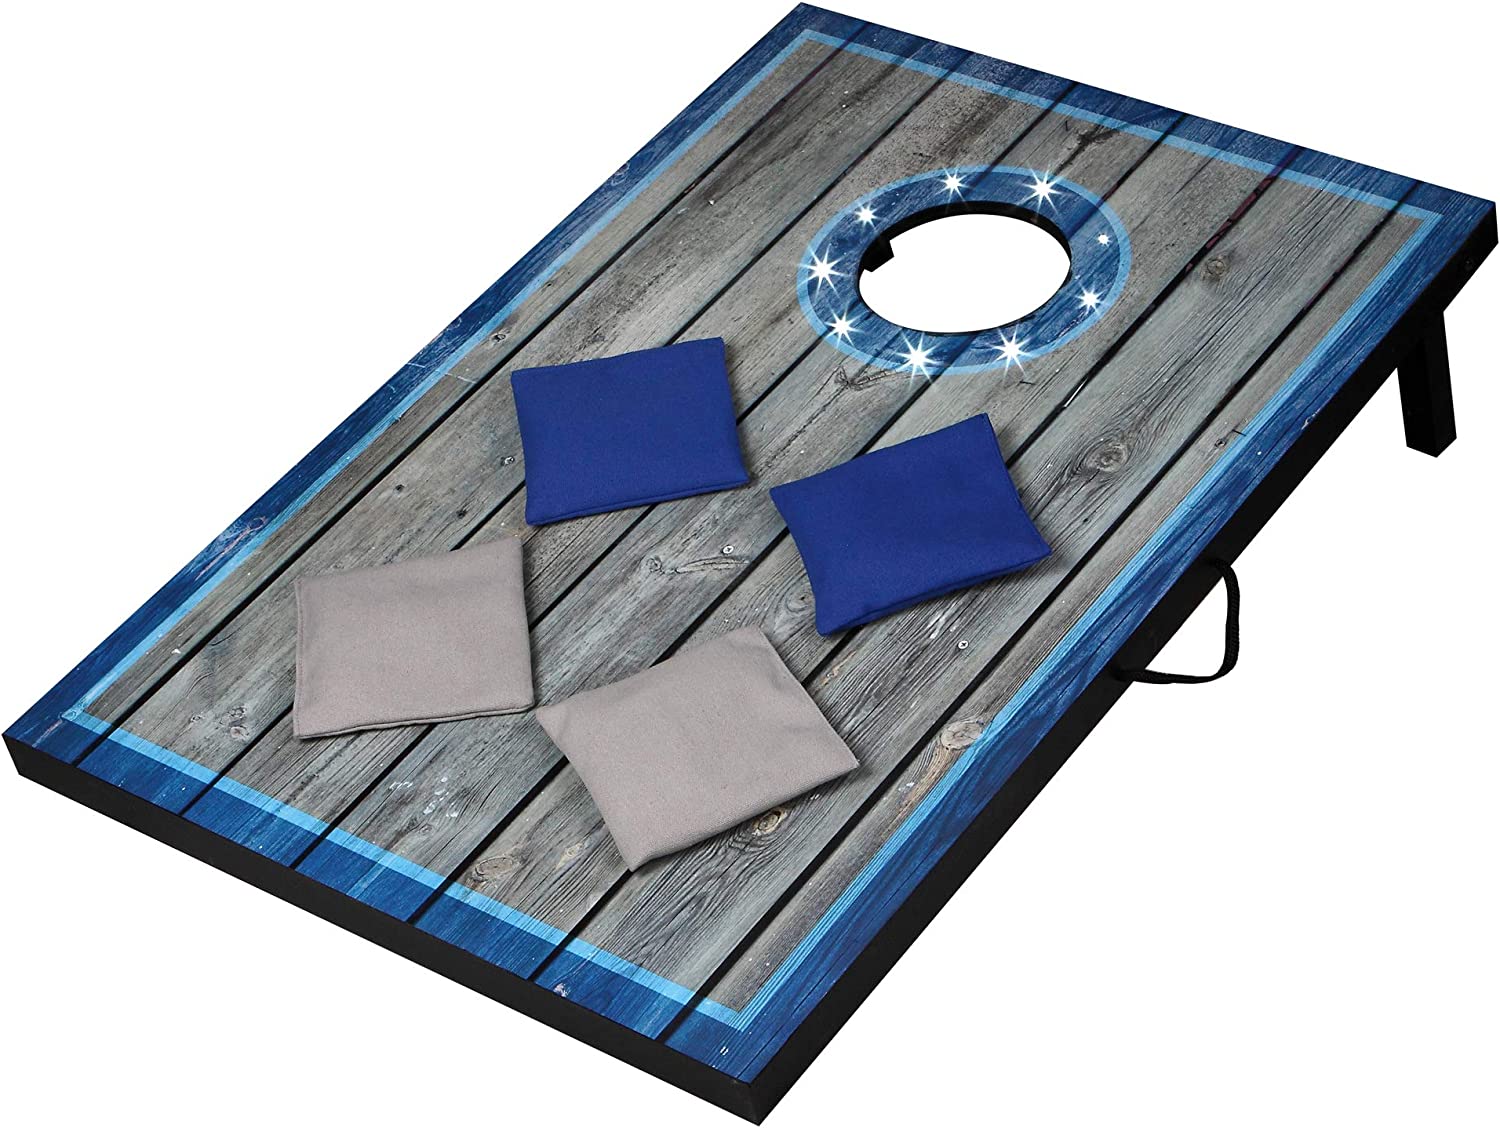 Hathaway LED Cornhole Set with Rustic Target Boards &amp; 8 Bean Toss Bags, Lighted Target Areas, Carry Handles for Portability √É¬¢√¢‚Äö¬¨√¢‚Ç¨≈ì Blue/White